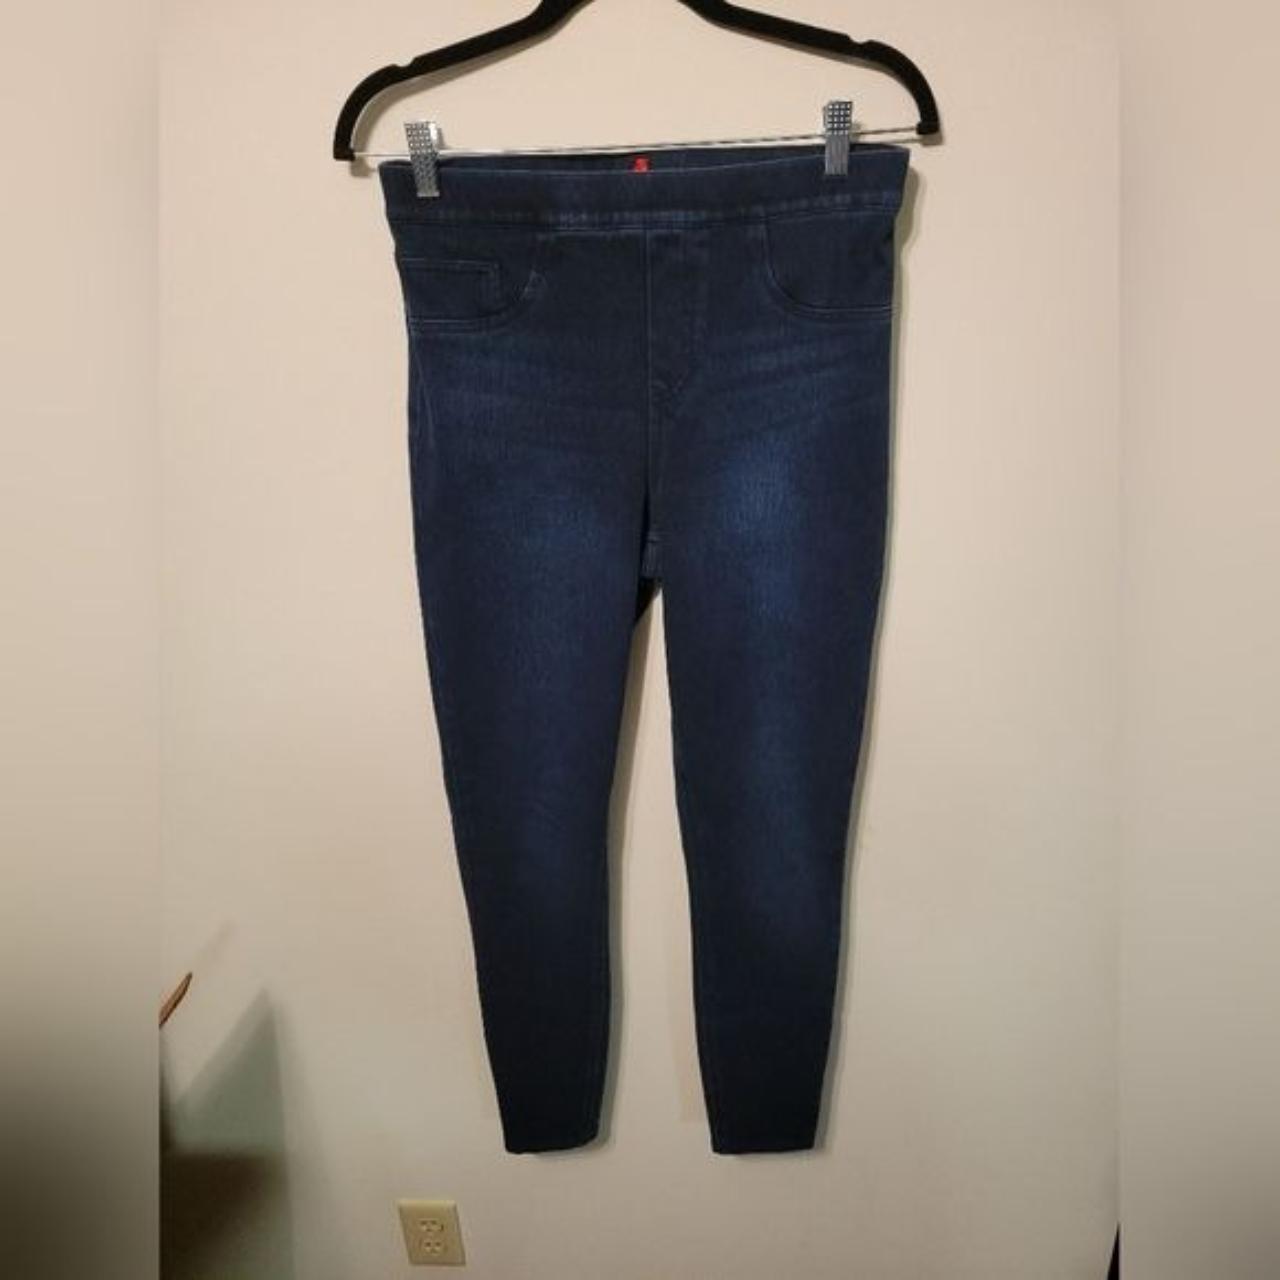 Women's Size Medium Spanx Jeans. Front pockets are - Depop